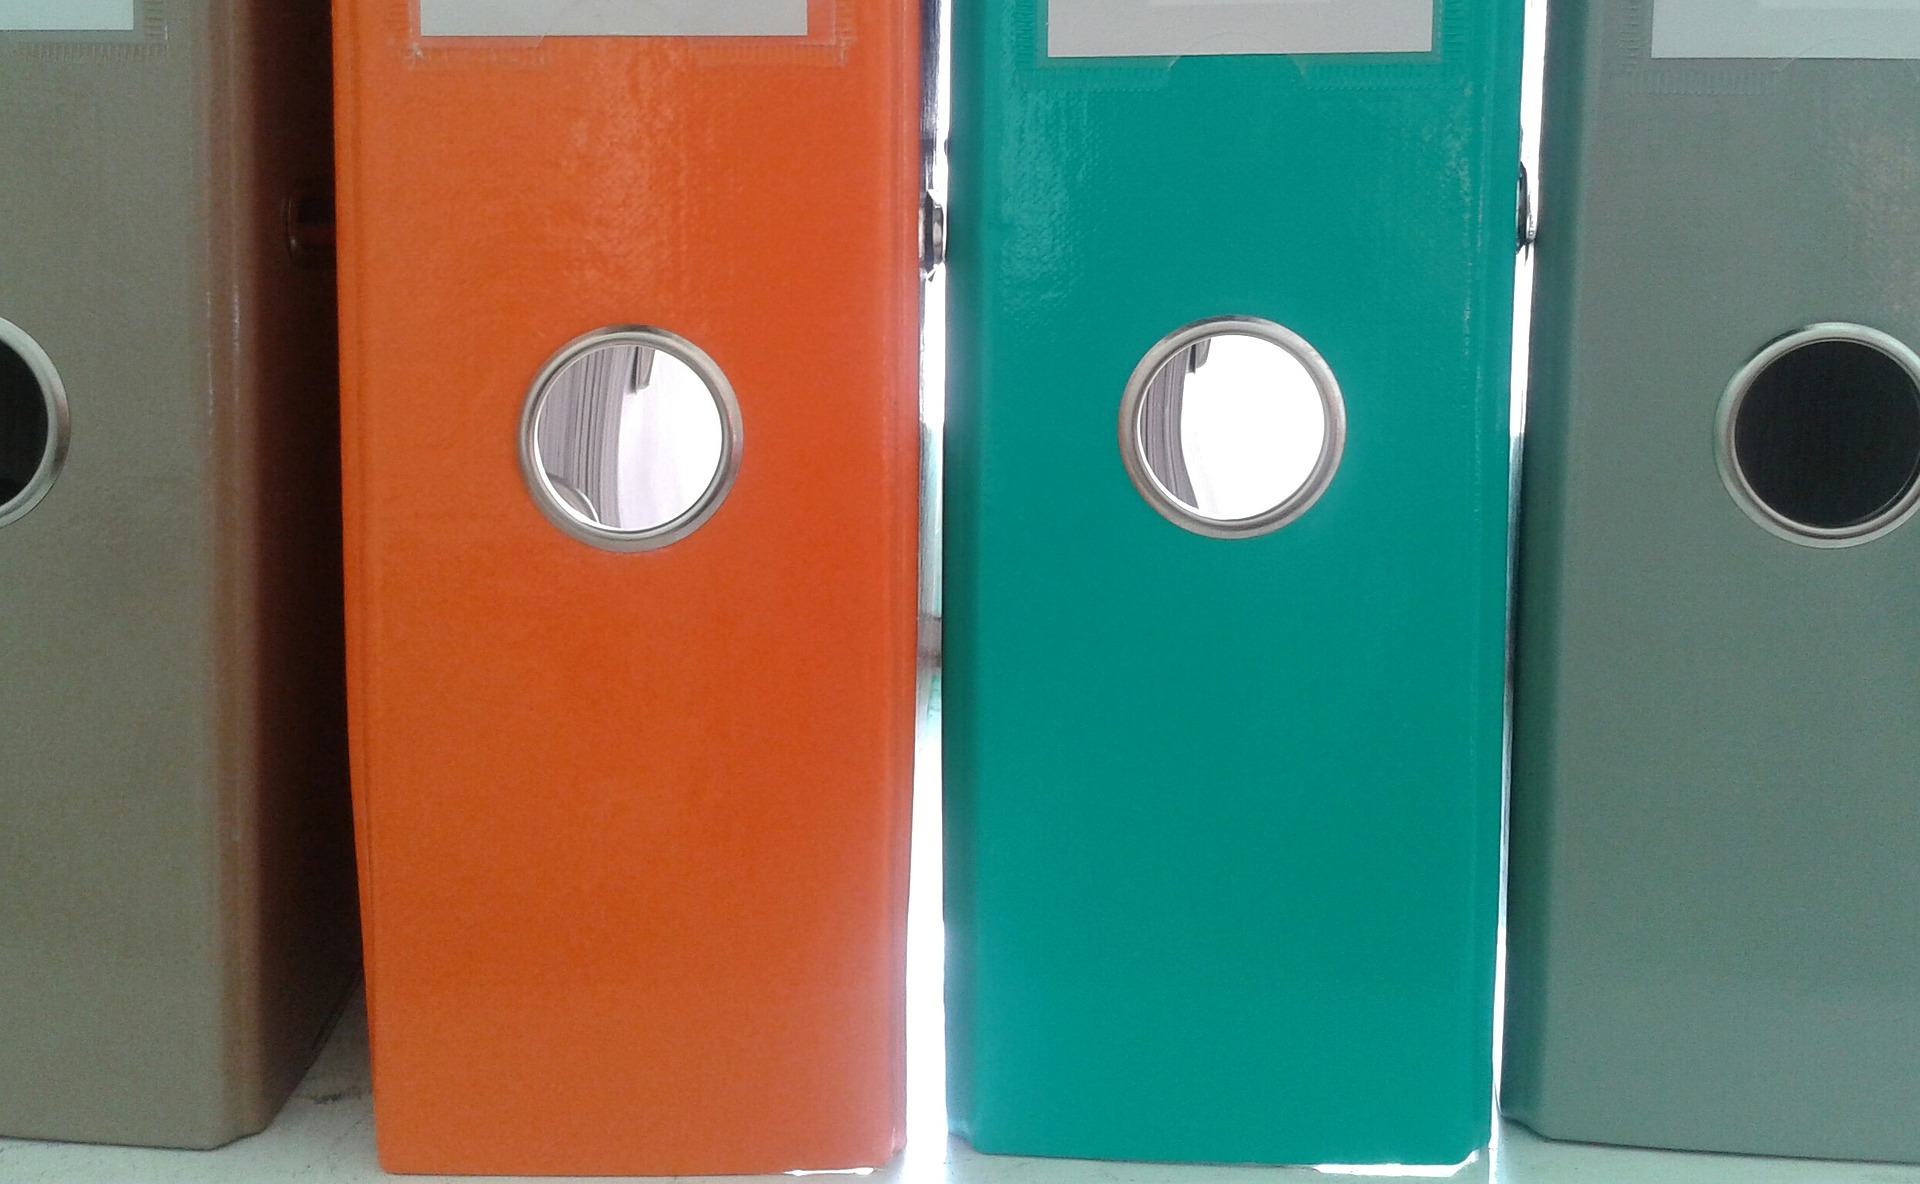 A row of binders with different colors